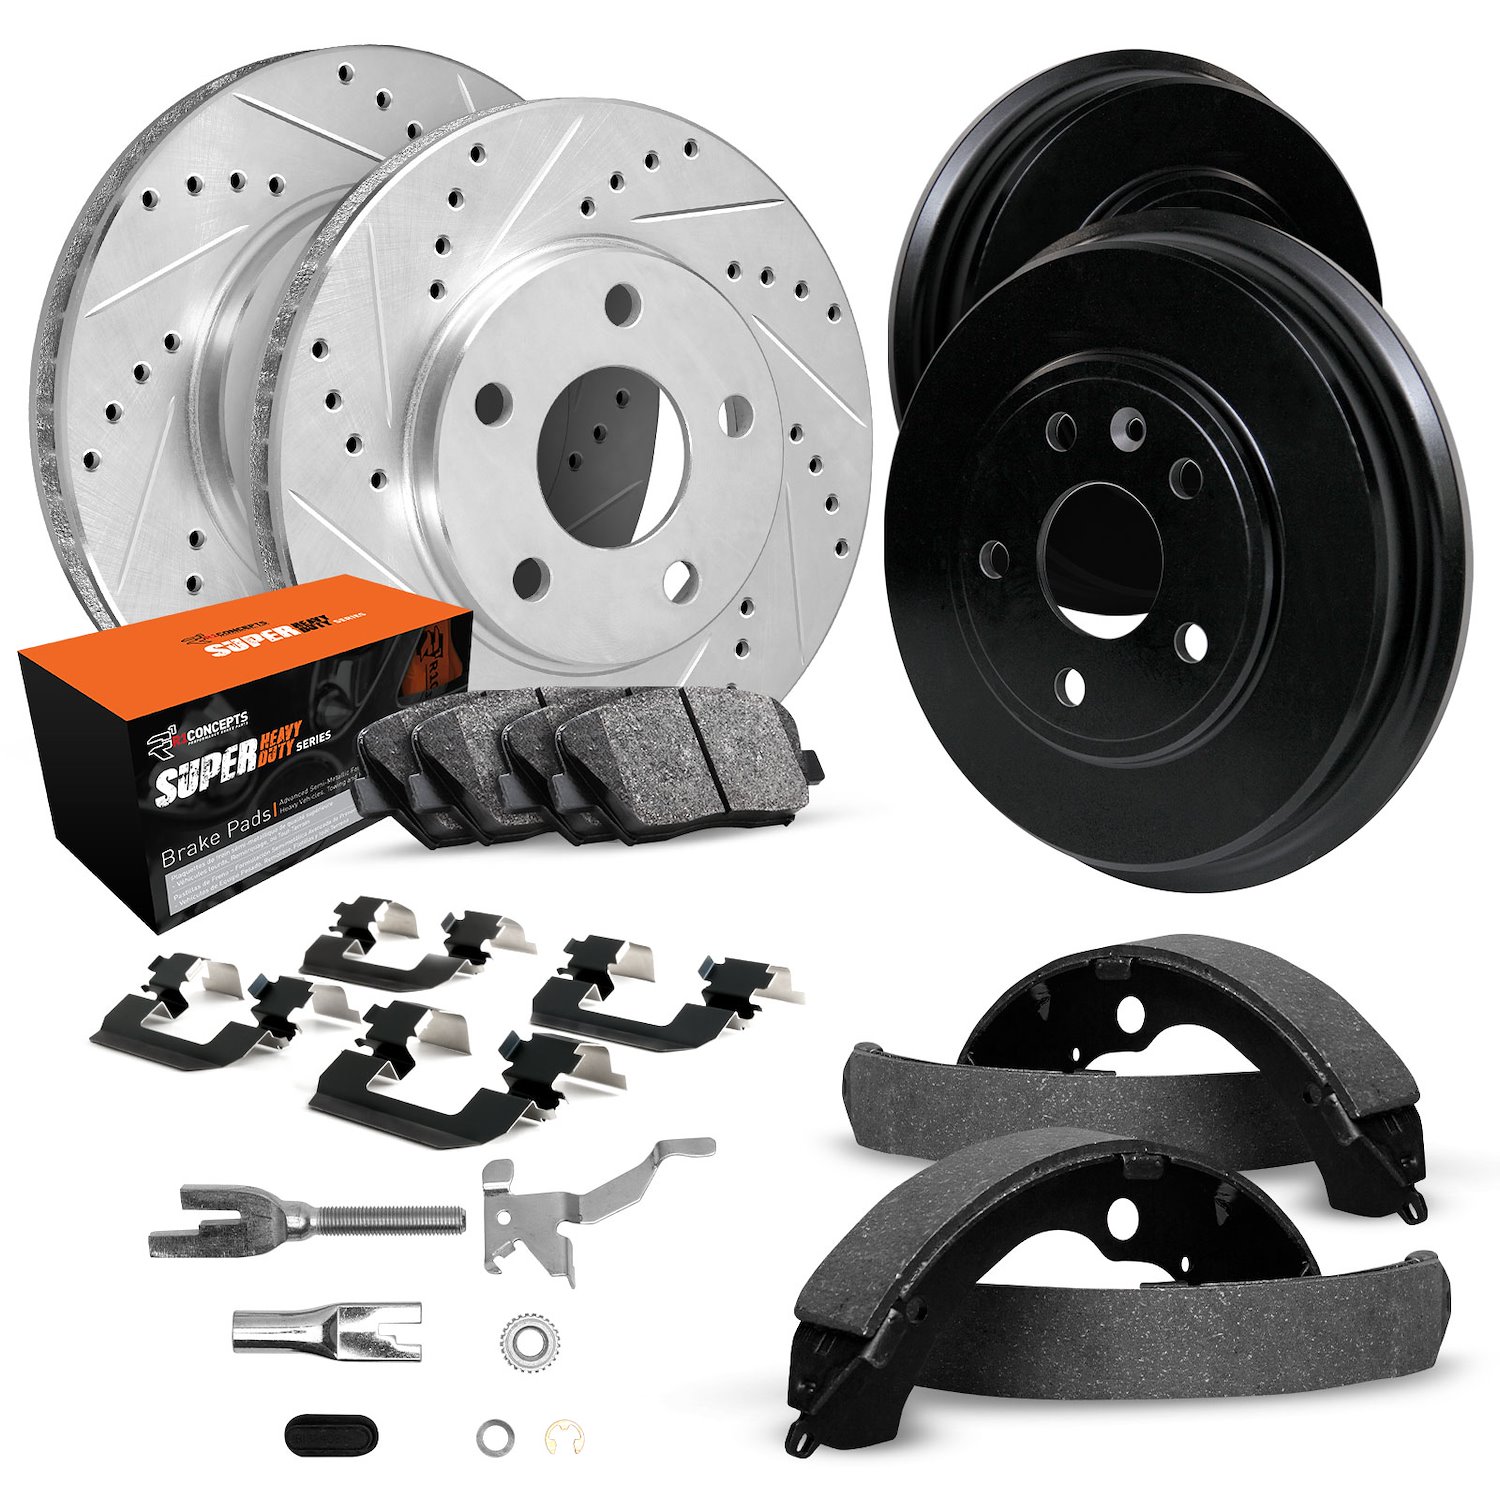 E-Line Drilled/Slotted Silver Rotor & Drum Set w/Super-Duty Pads, Shoes/Hardware/Adjusters, 1974-1981 Mopar